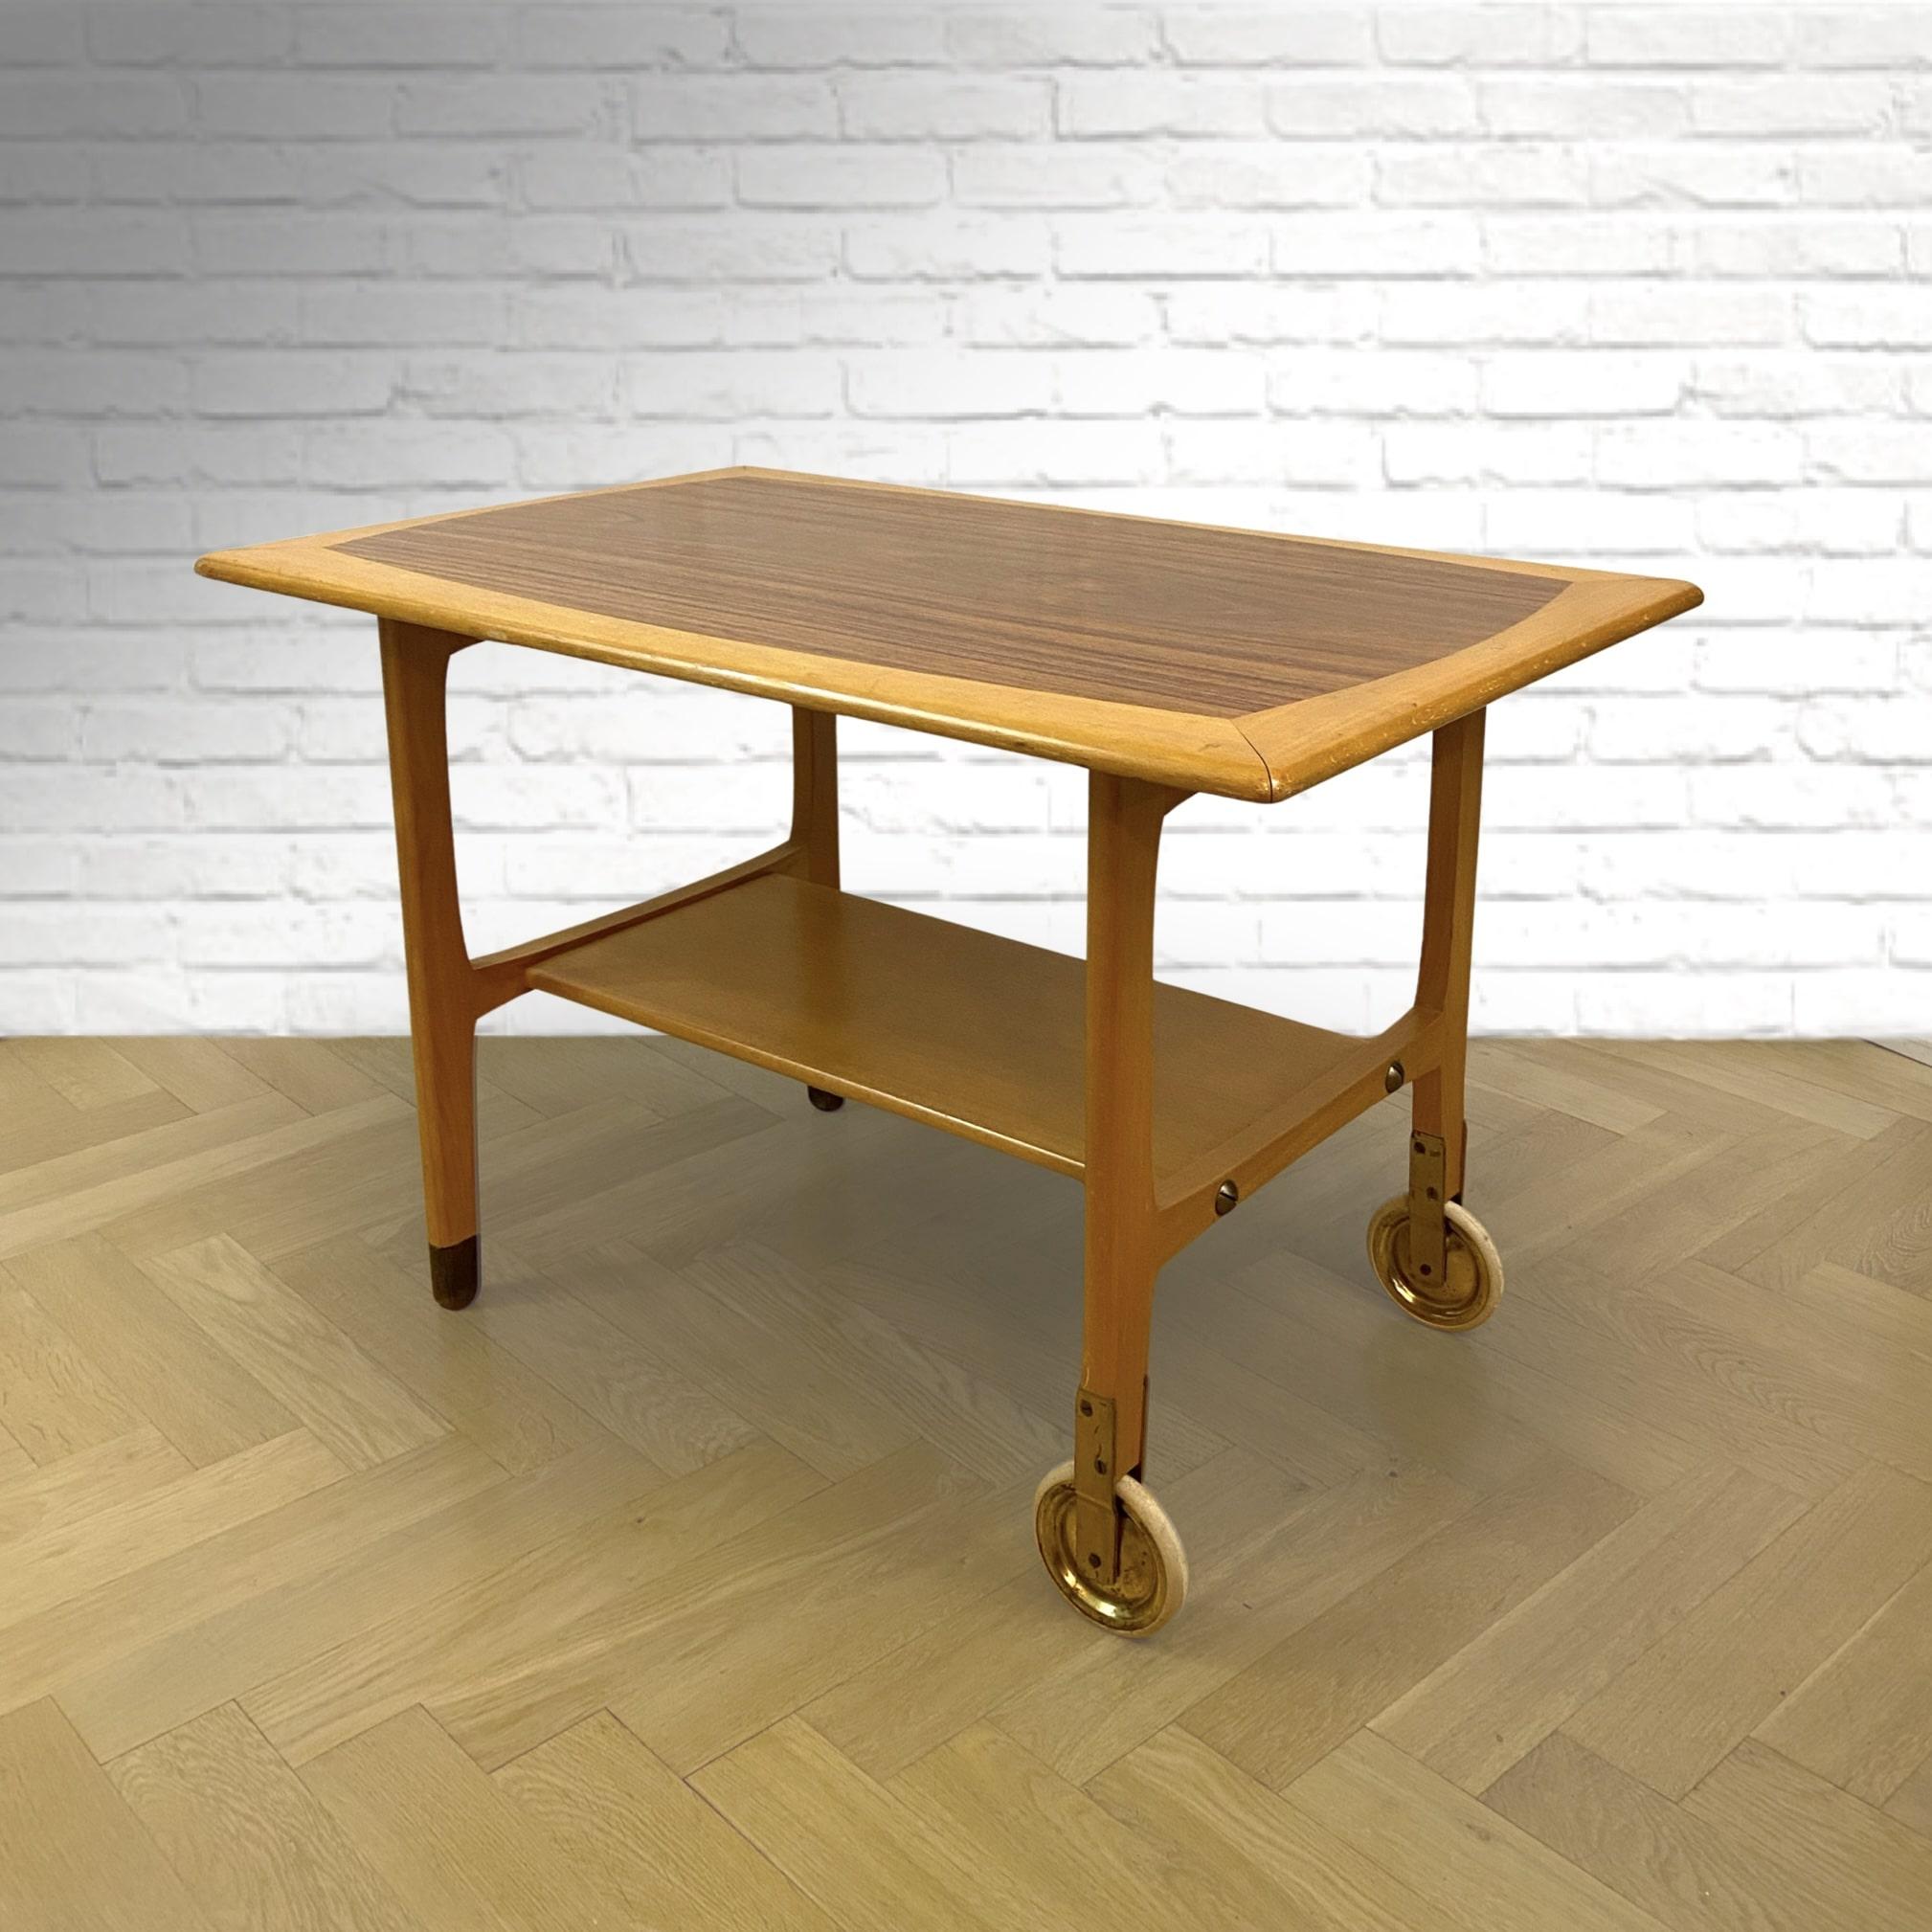 A Swedish mid-century serving table, made from beech wood and walnut. Two legs on casters, the other two with dark wooden feet. The shelf gives the table extra space for storage.